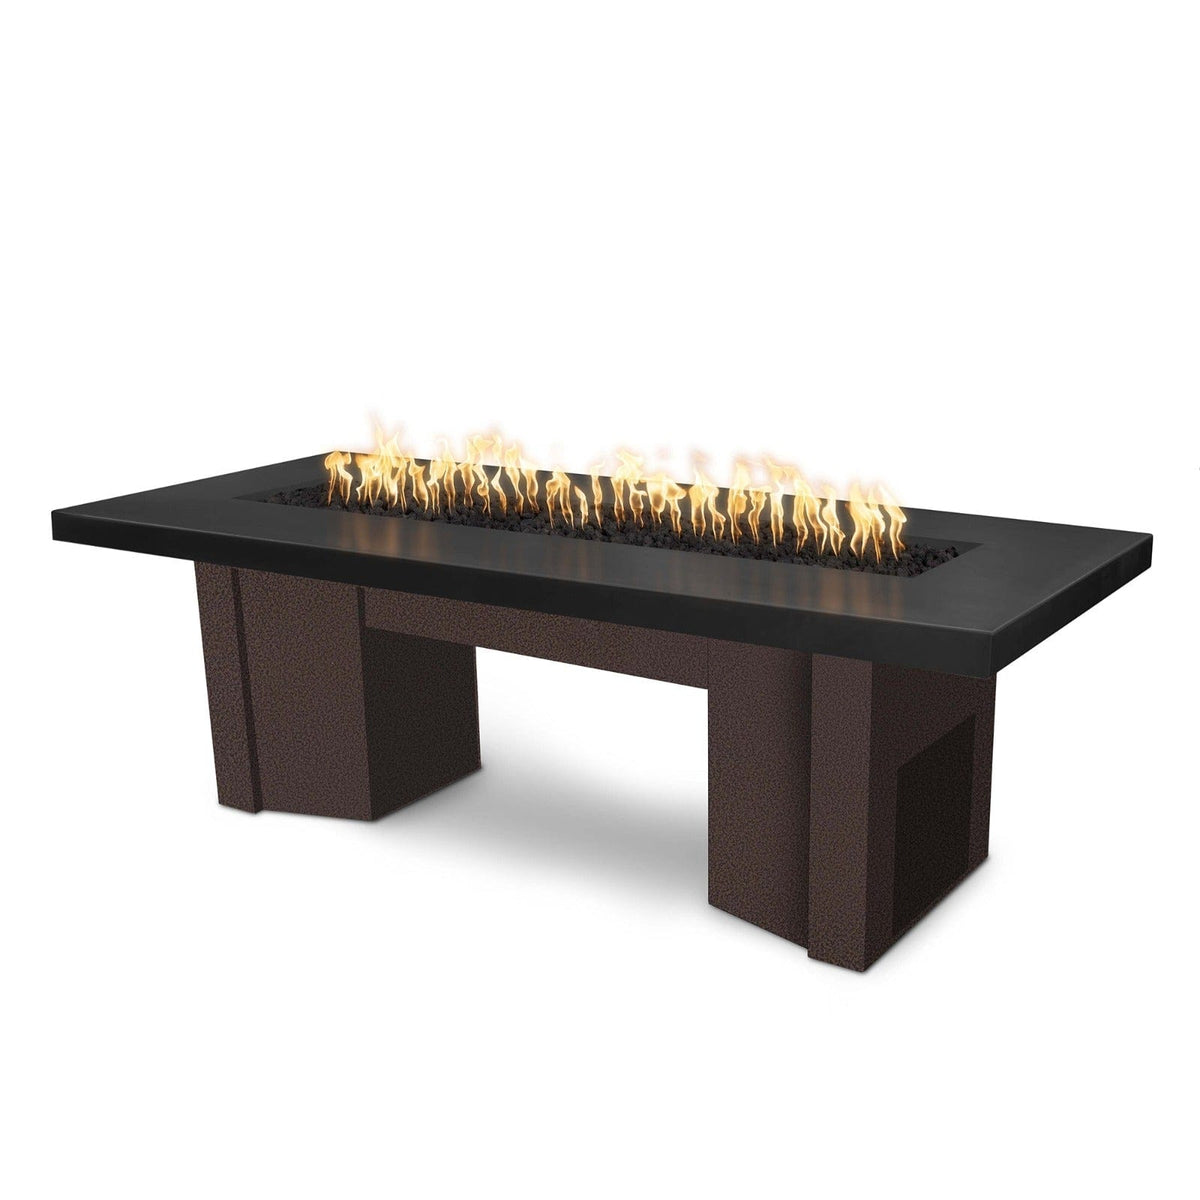 The Outdoor Plus Fire Features Black (-BLK) / Copper Vein Powder Coated Steel (-CPV) The Outdoor Plus 78&quot; Alameda Fire Table Smooth Concrete in Liquid Propane - Match Lit with Flame Sense System / OPT-ALMGFRC78FSML-LP